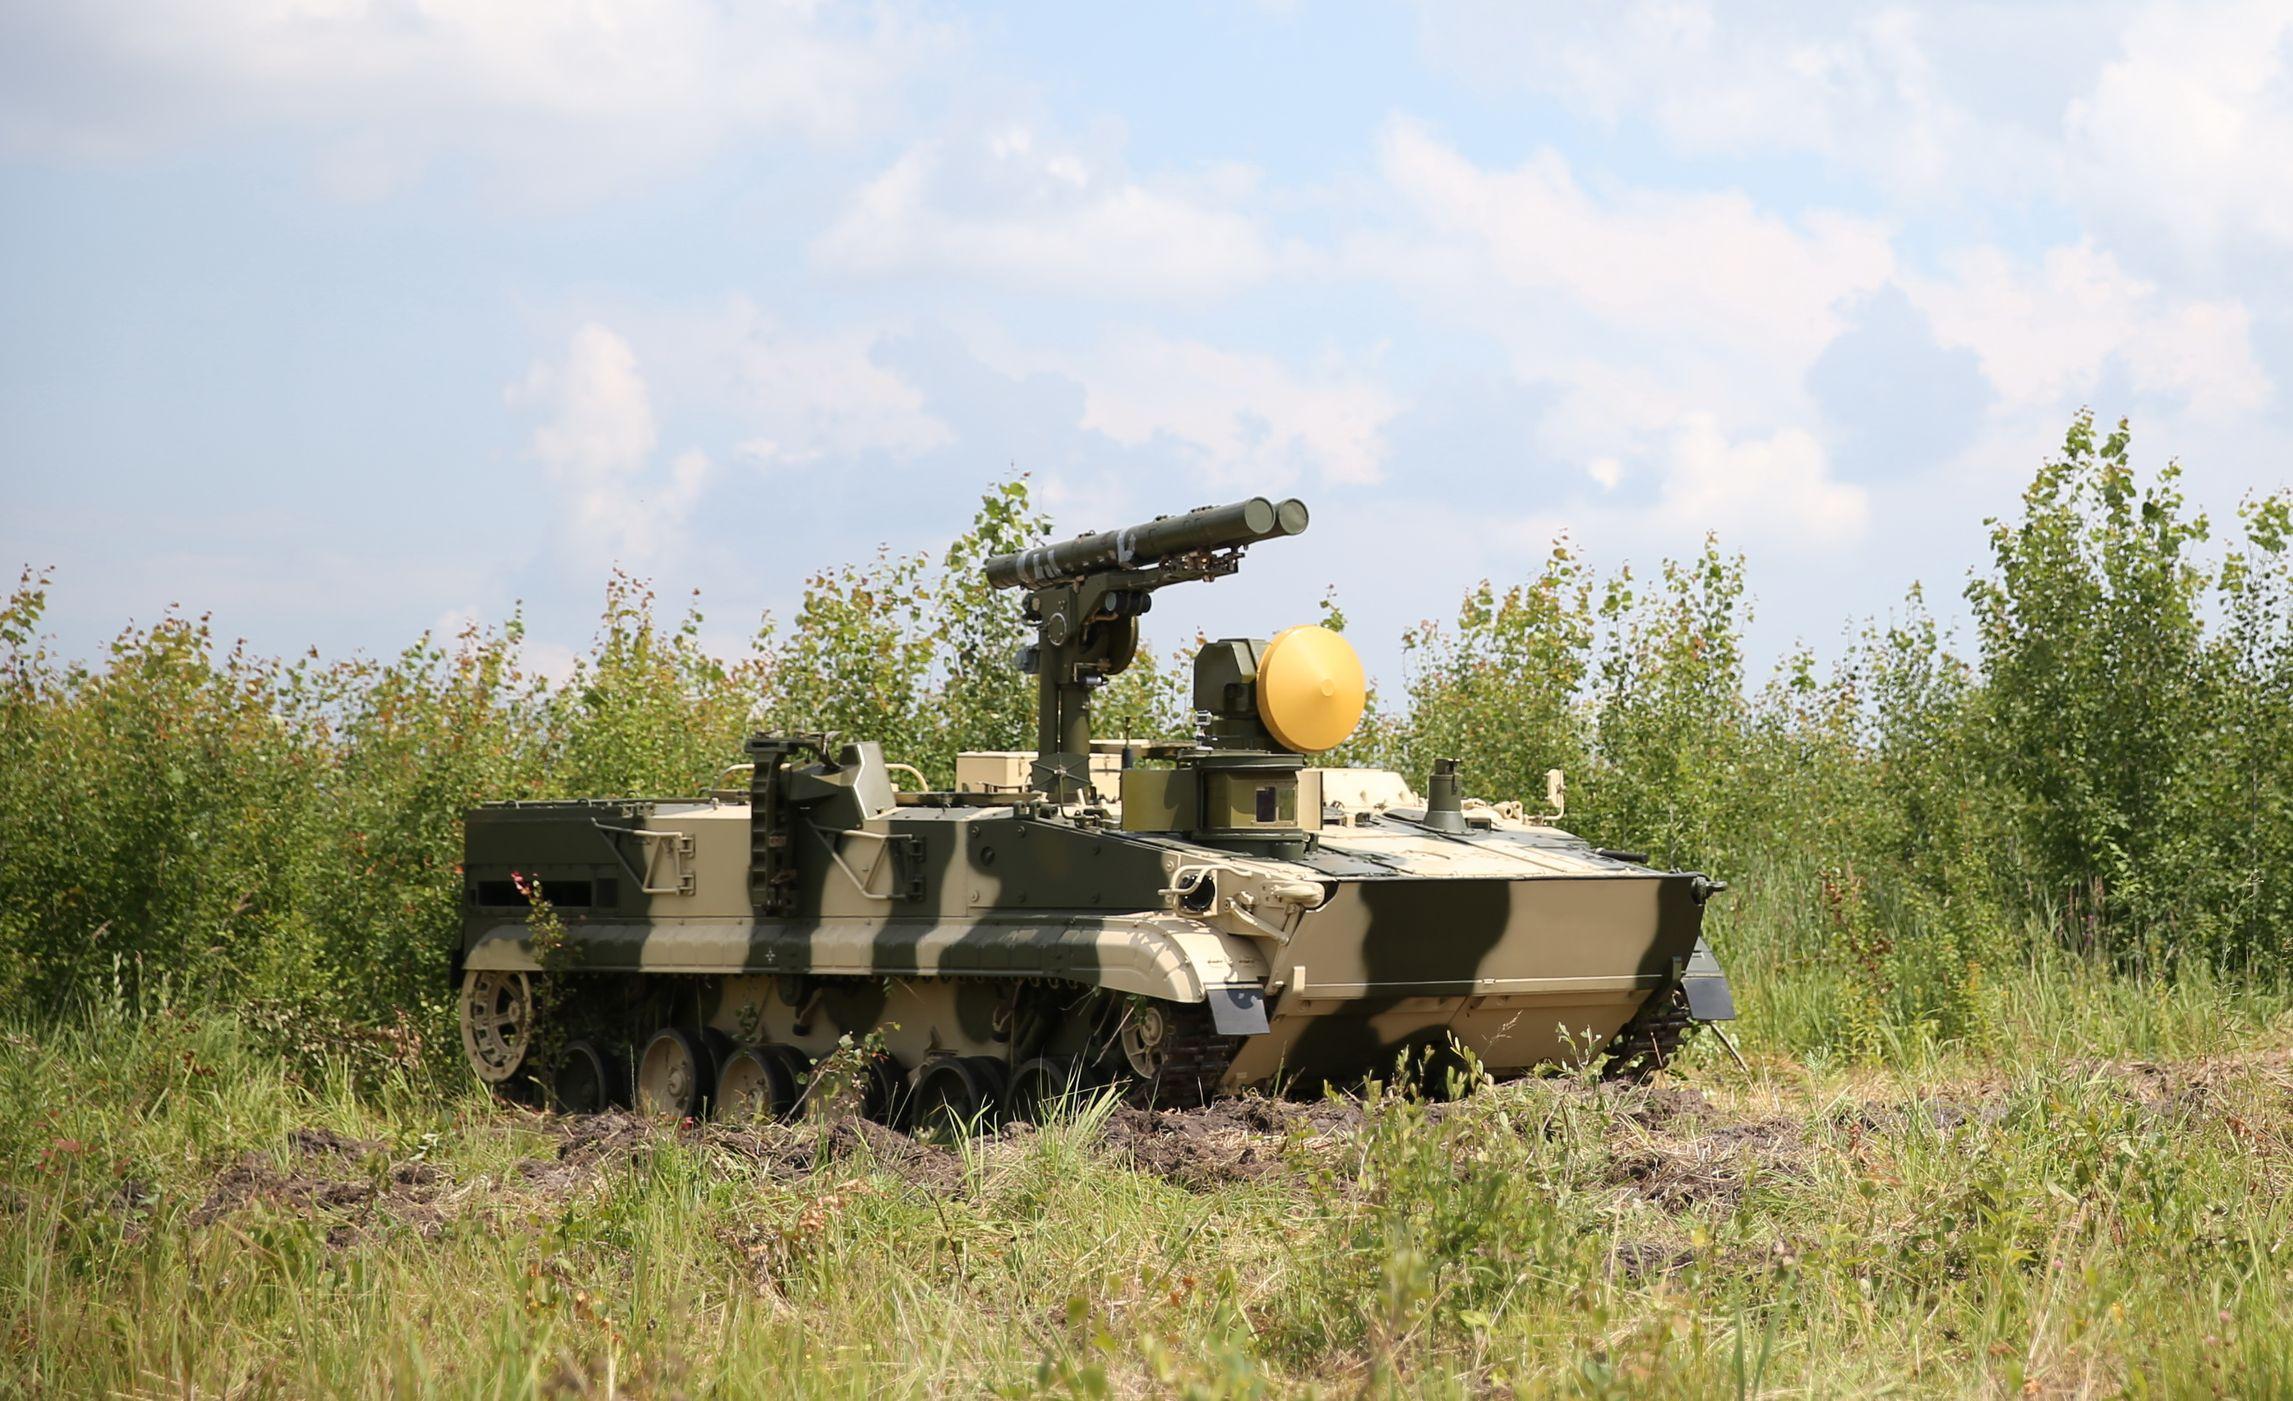 Khrizantema-S Self-Propelled Anti-Tank Guided Missile System